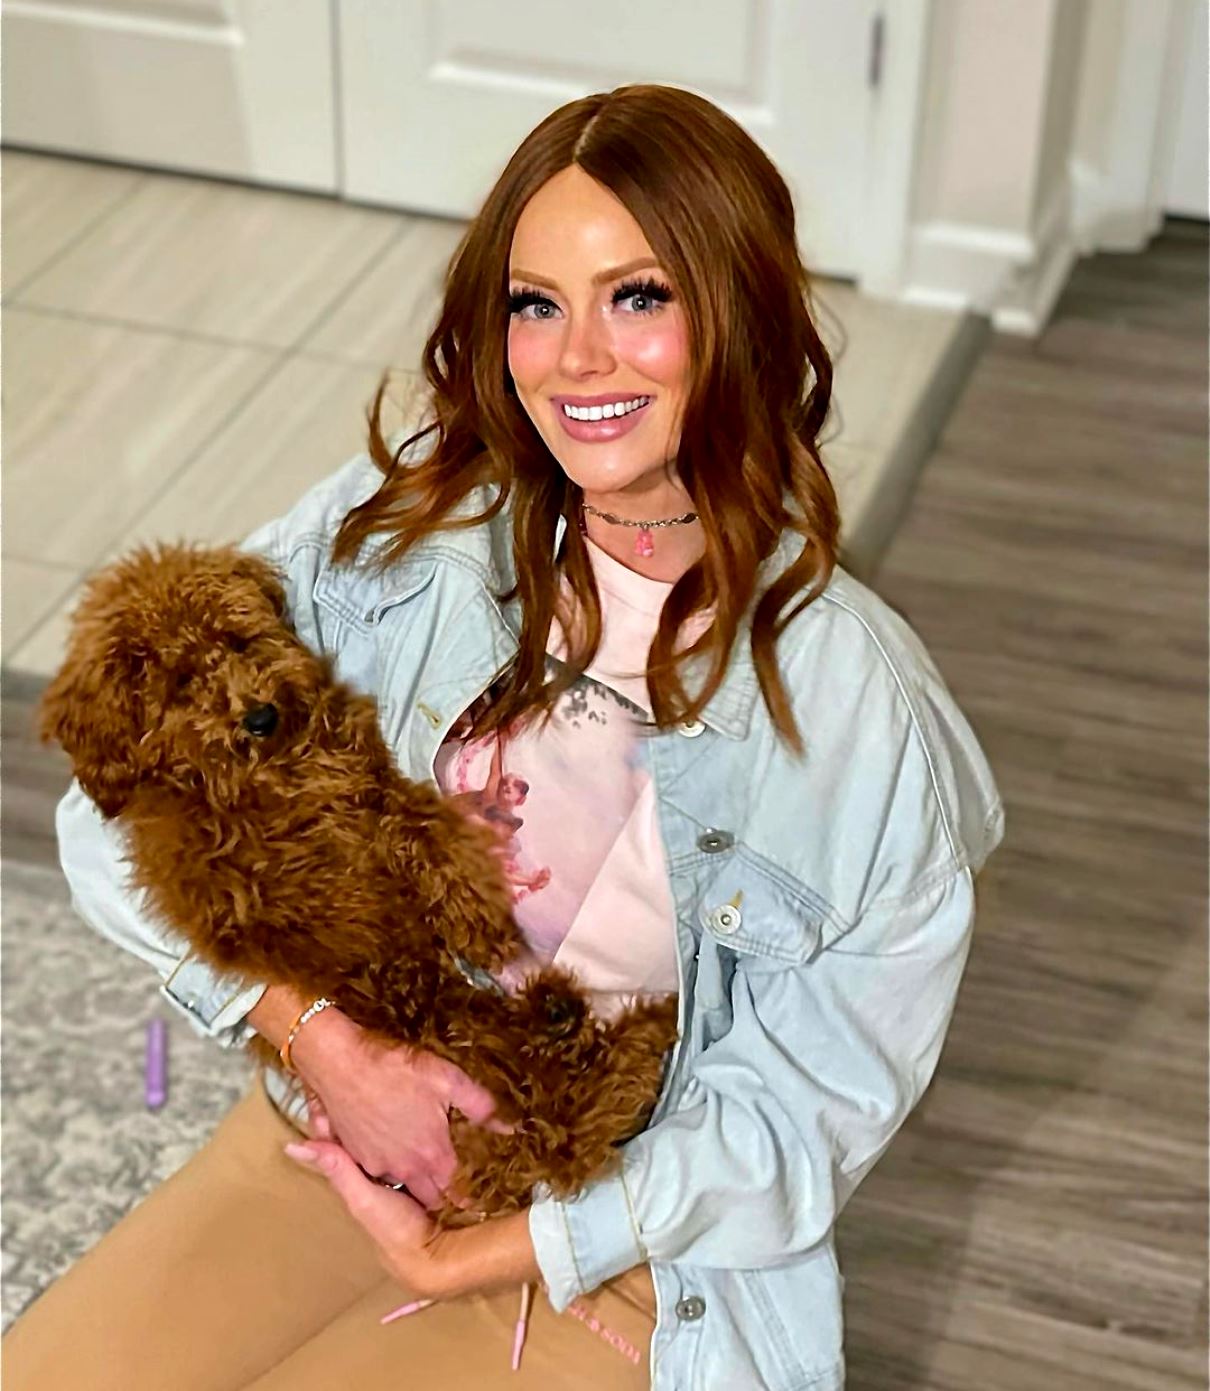 Southern Charm's Kathryn Dennis Had "Bottles of Fireball" and Dog in Car During DUI Arrest, Refused Breathalyzer and Performed Poorly During Field Sobriety Tests, Plus Insider Claims Friends Are "Concerned"